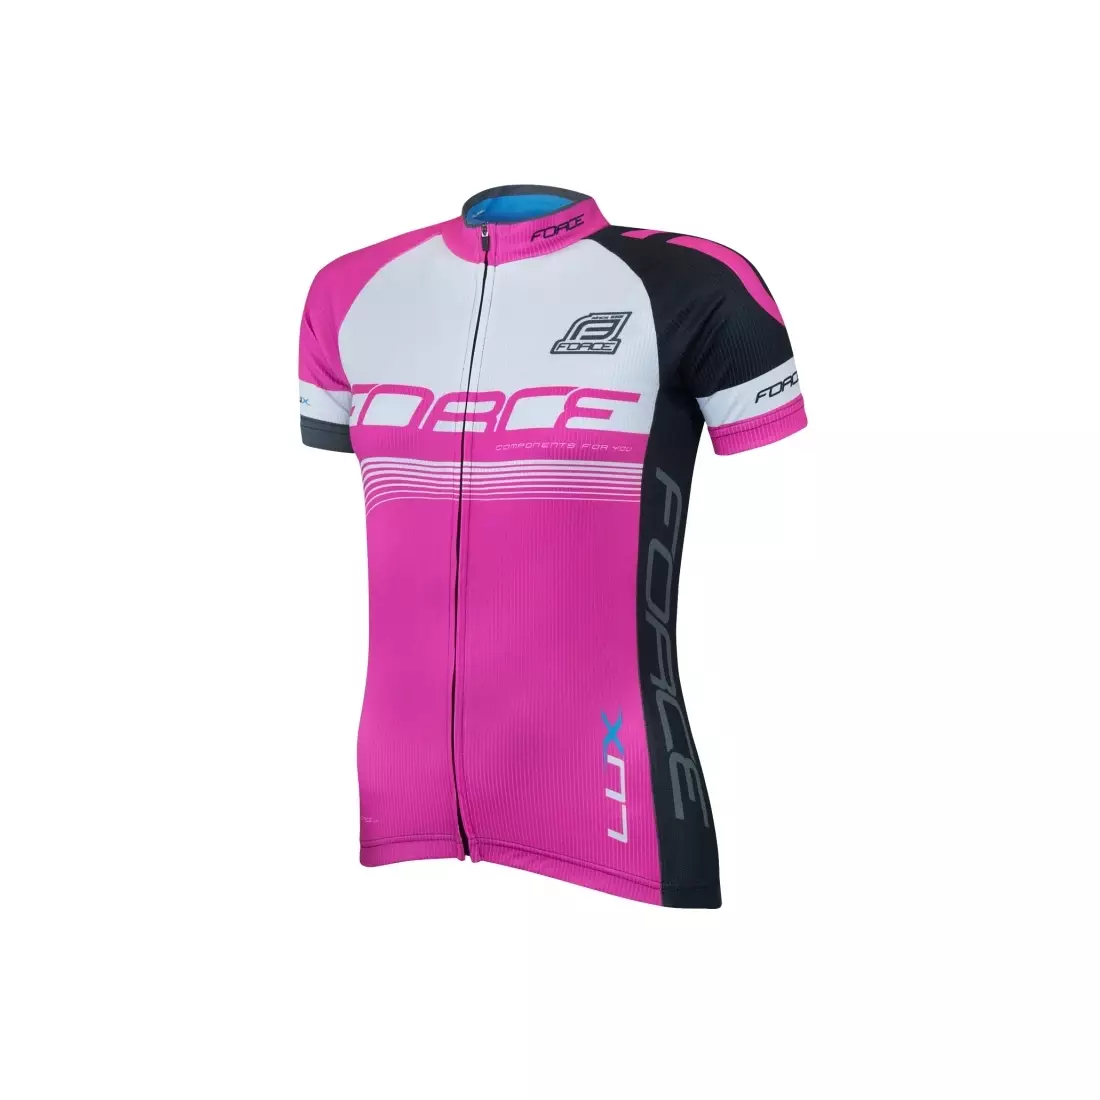 FORCE LUX women's cycling jersey 900132, color: pink